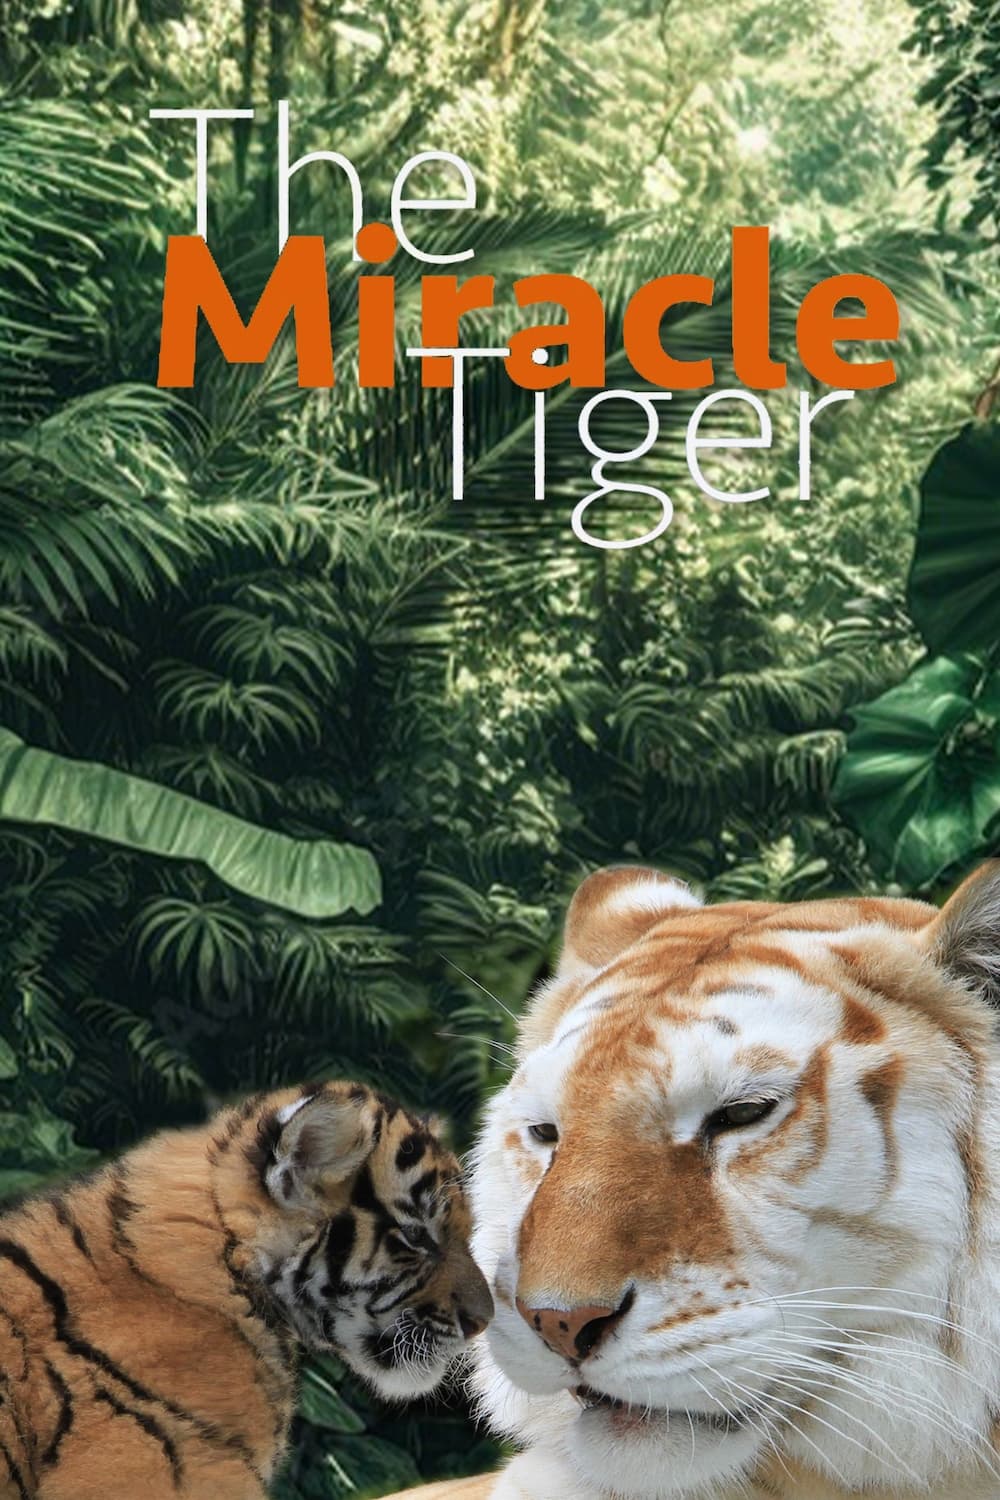 The Miracle Tiger